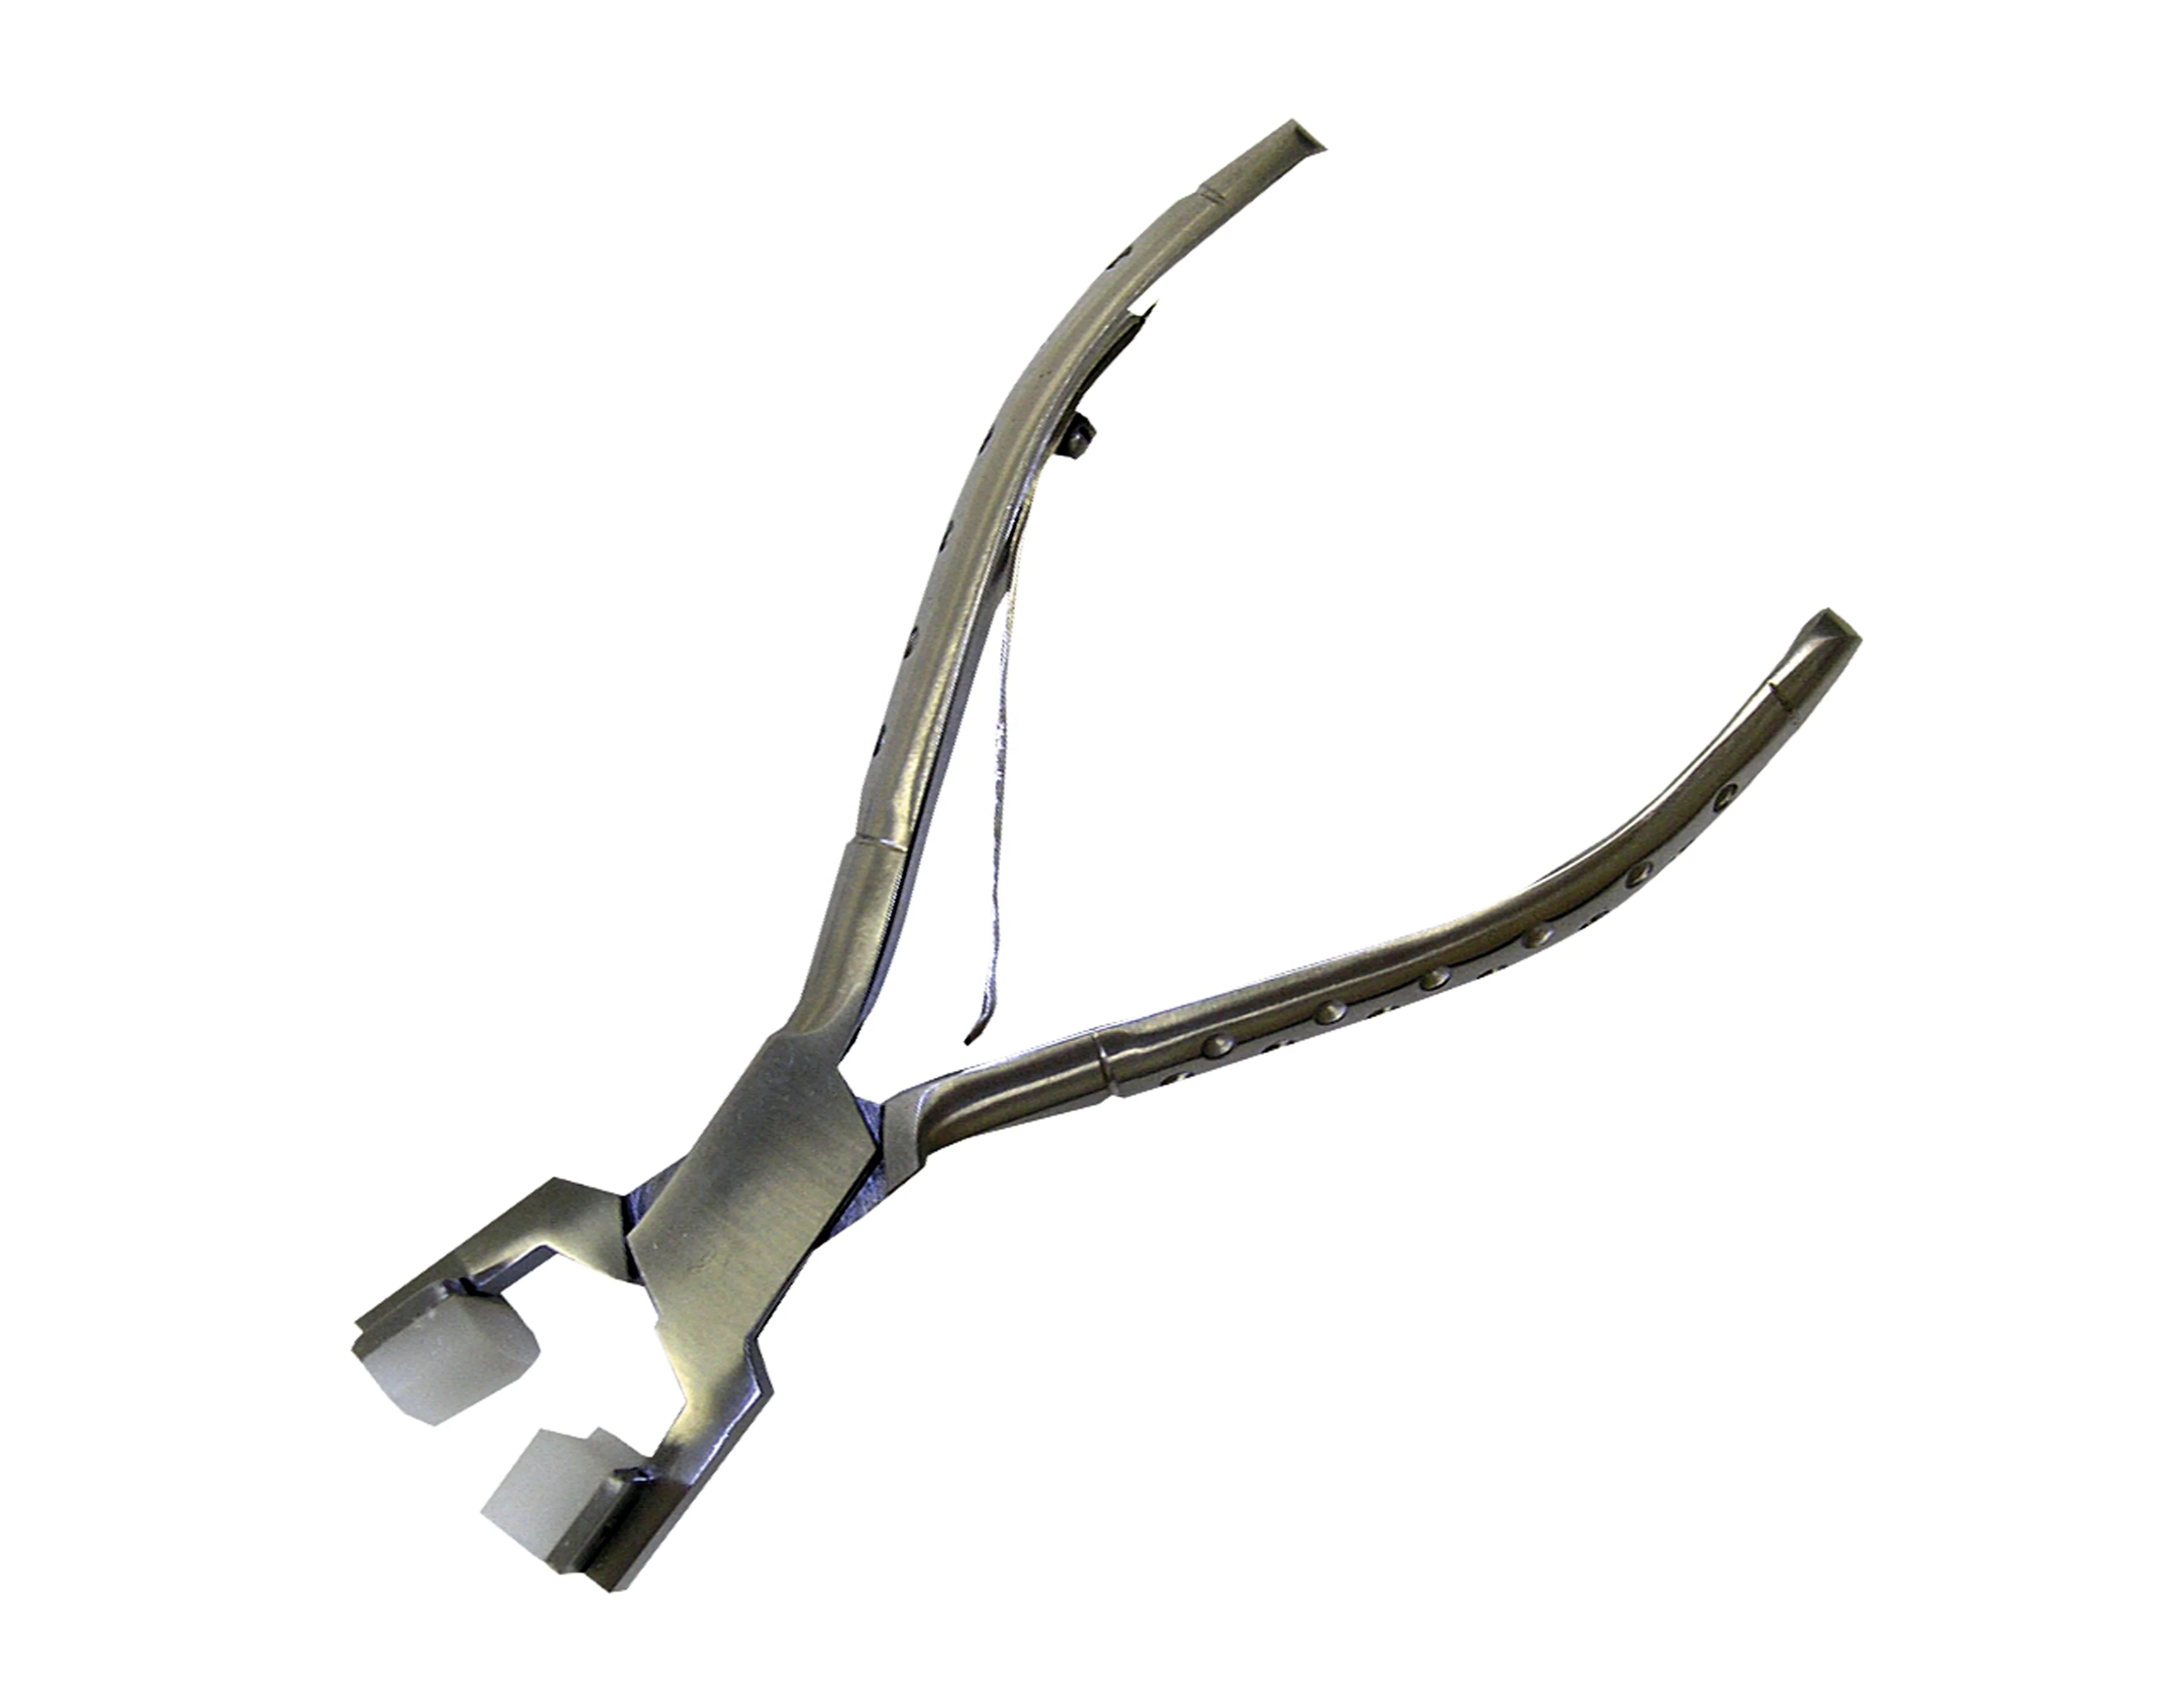 Eye wire Forming Pliers  / Optical pliers / Optical tools